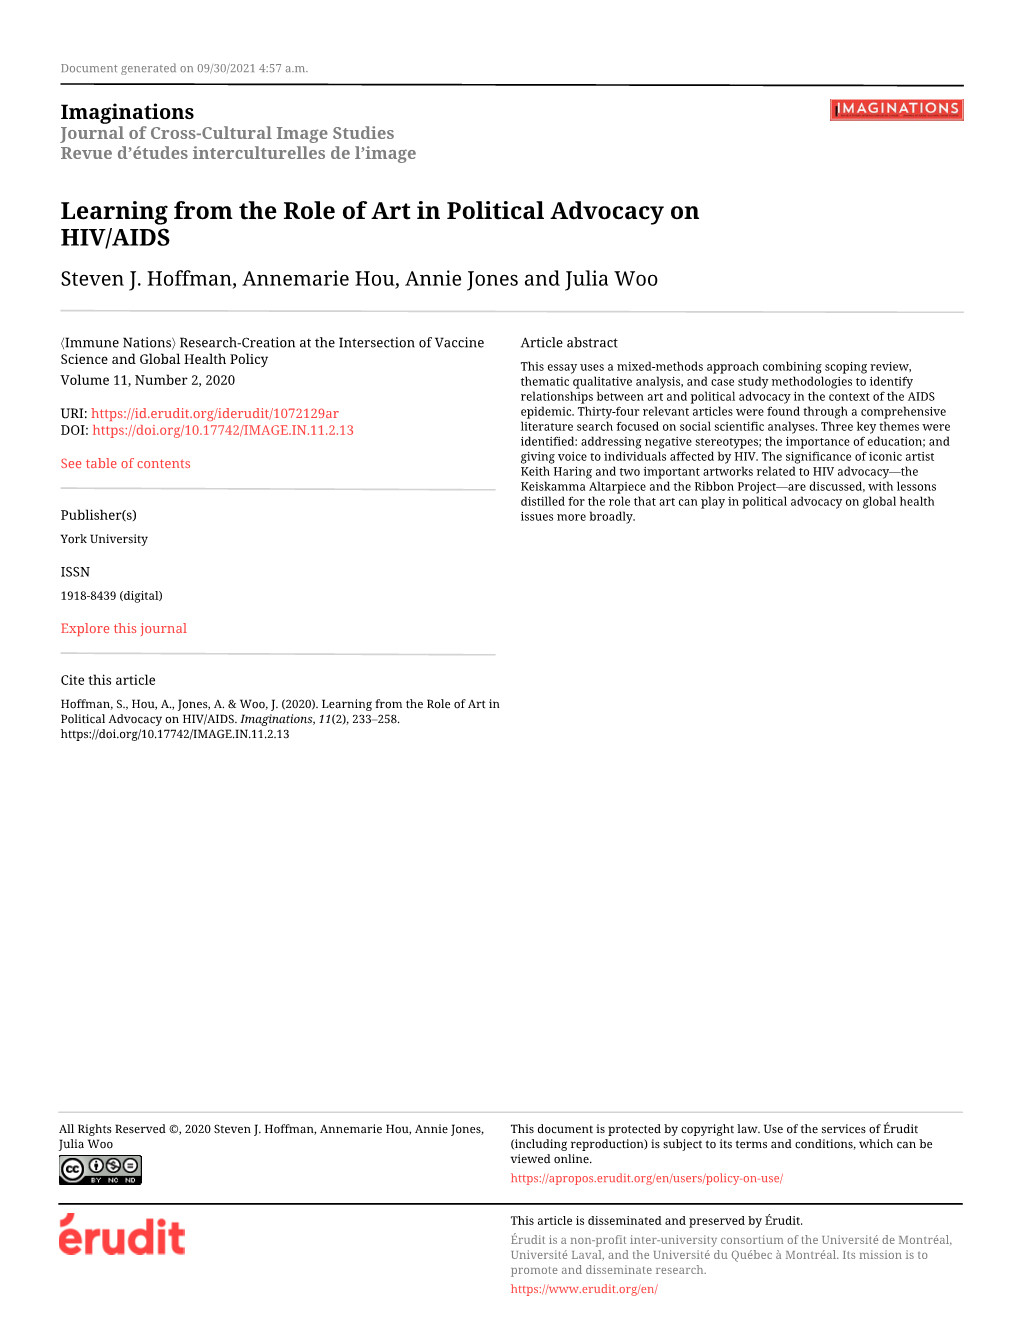 Learning from the Role of Art in Political Advocacy on HIV/AIDS Steven J